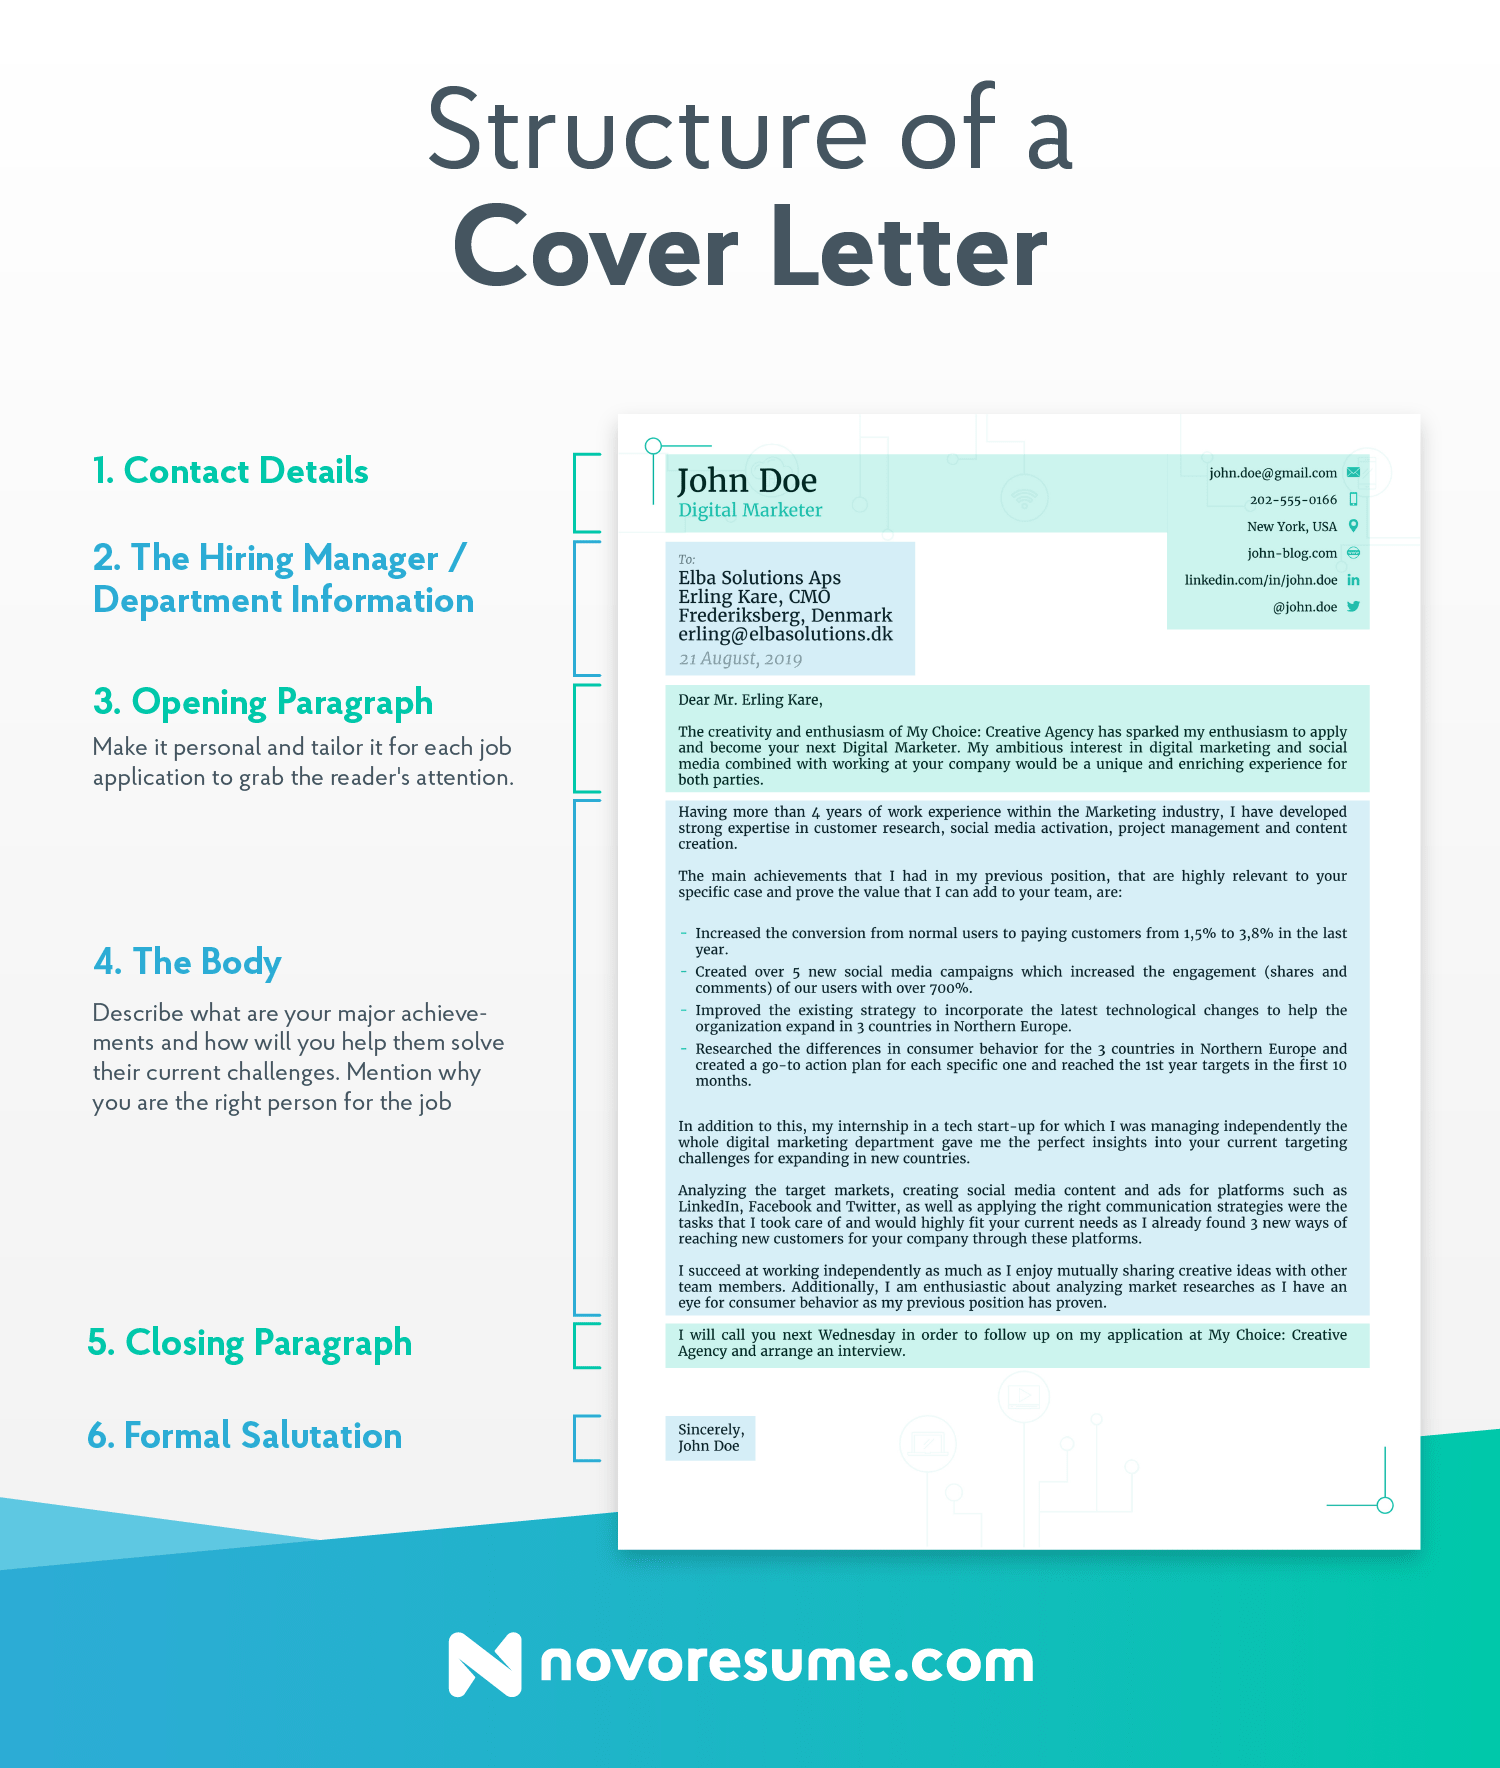 How to Address a Cover Letter in 2022